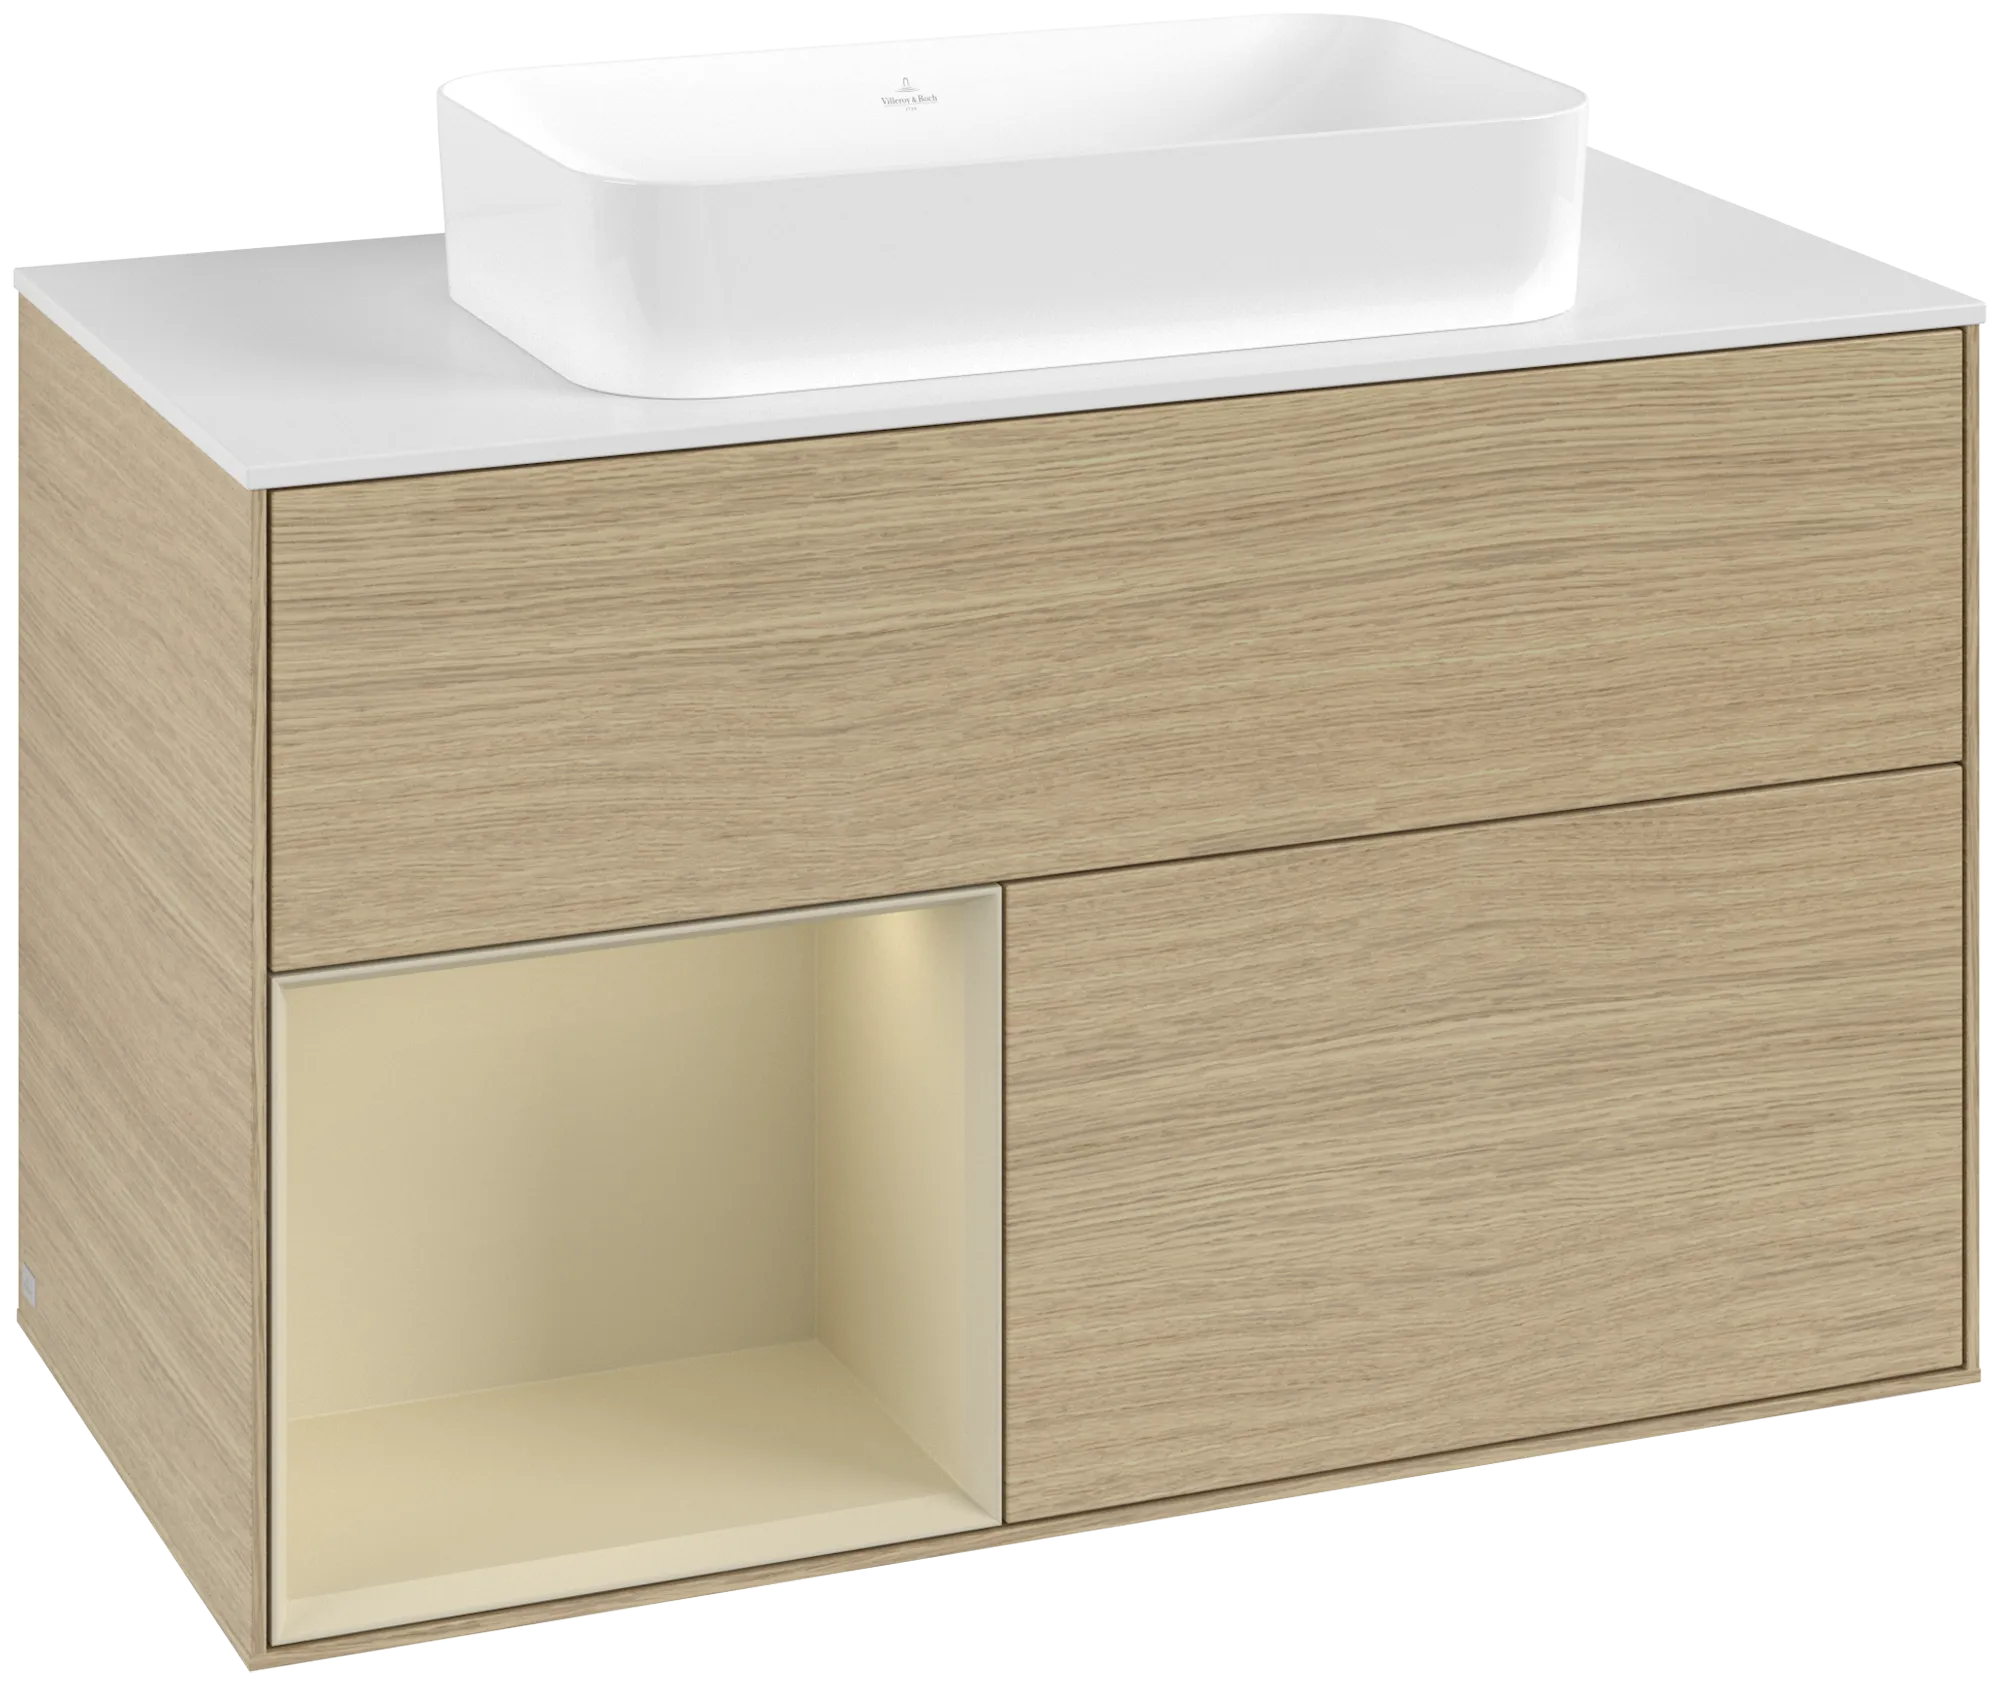 Picture of VILLEROY BOCH Finion Vanity unit, with lighting, 2 pull-out compartments, 1000 x 603 x 501 mm, Oak Veneer / Silk Grey Matt Lacquer / Glass White Matt #G651HJPC